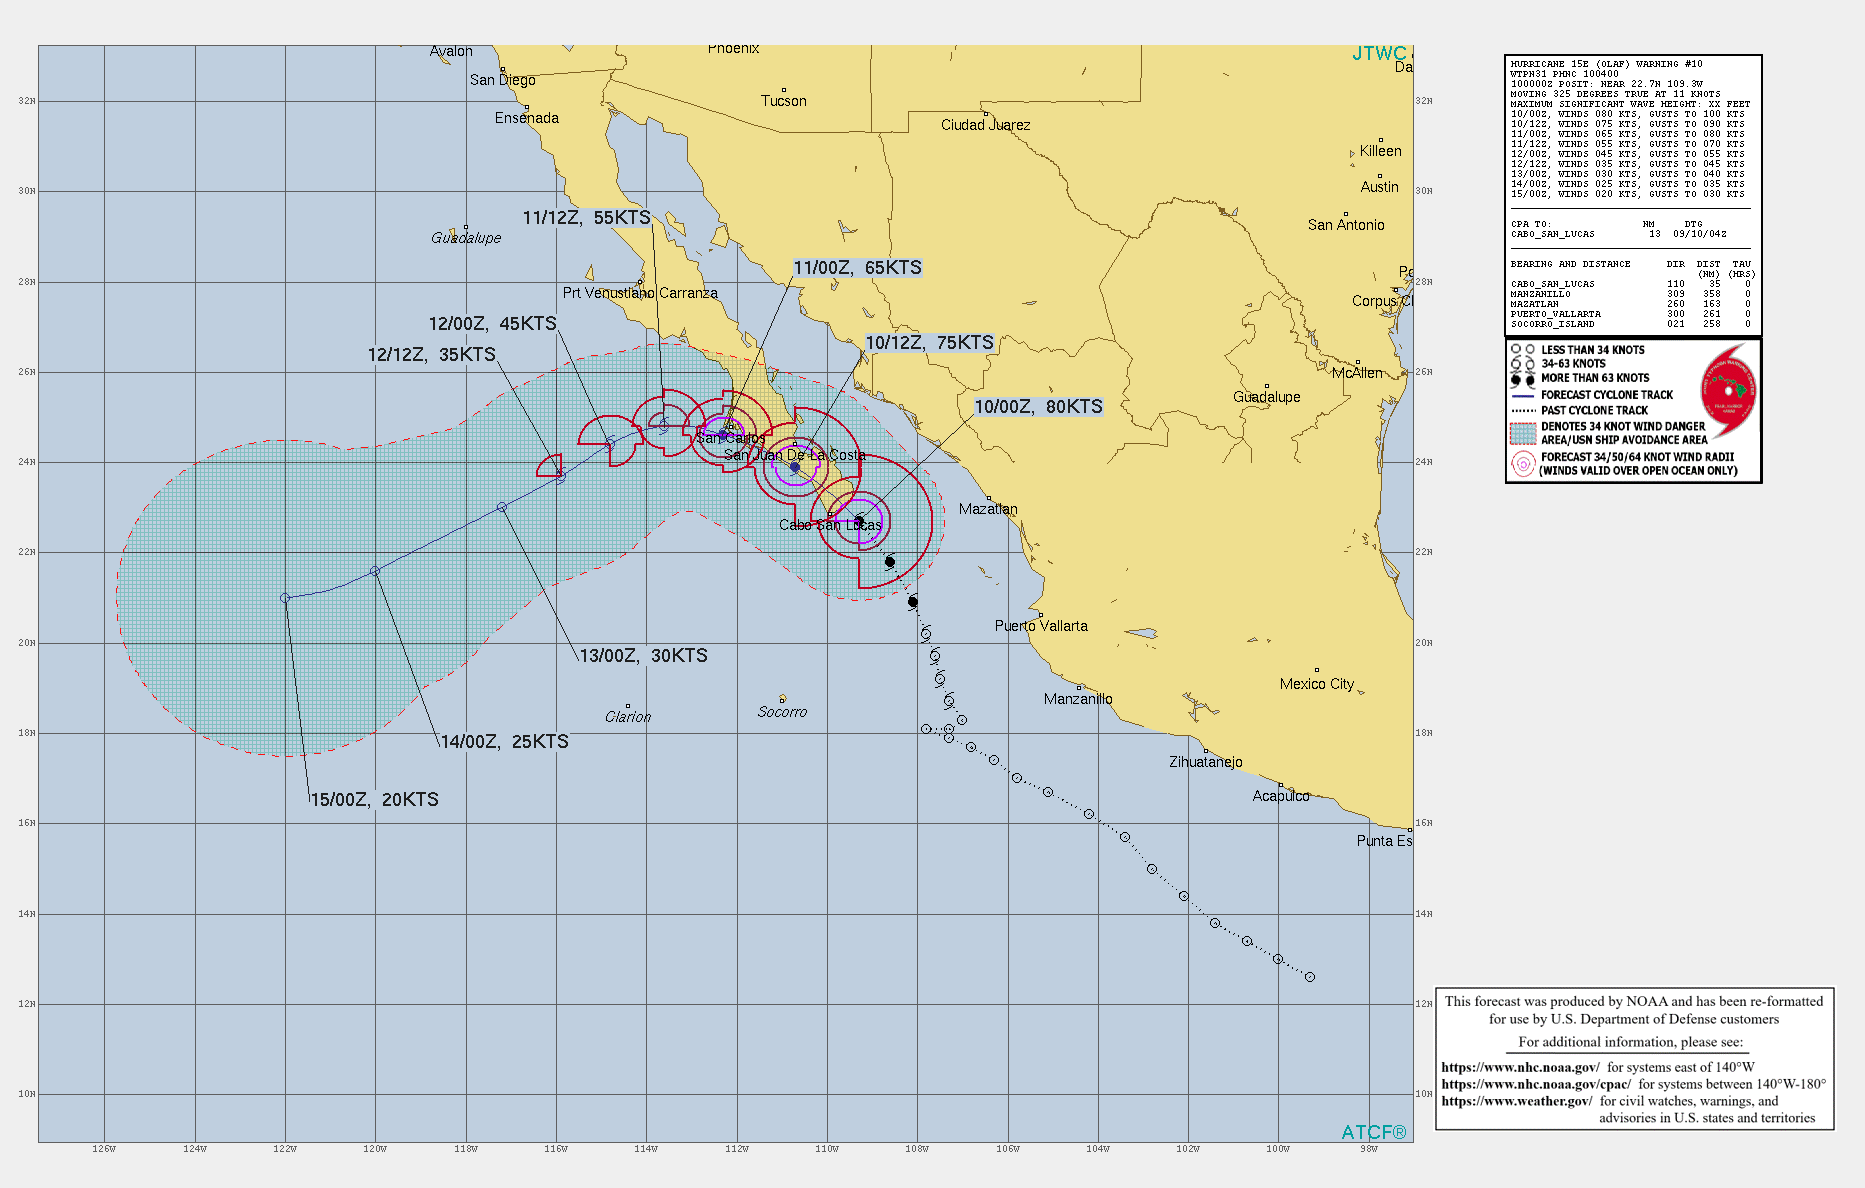 EASTERN PACIFIC. HU 15E(OLAF). WARNING 10 ISSUED AT 10/03UTC. CURRENT INTENSITY IS 80KNOTS/CAT1. THE HURRICANE IS POISED TO MAKE LANDFALL APPRX 25KM EAST OF CABO SAN LUCAS/MEXICO.